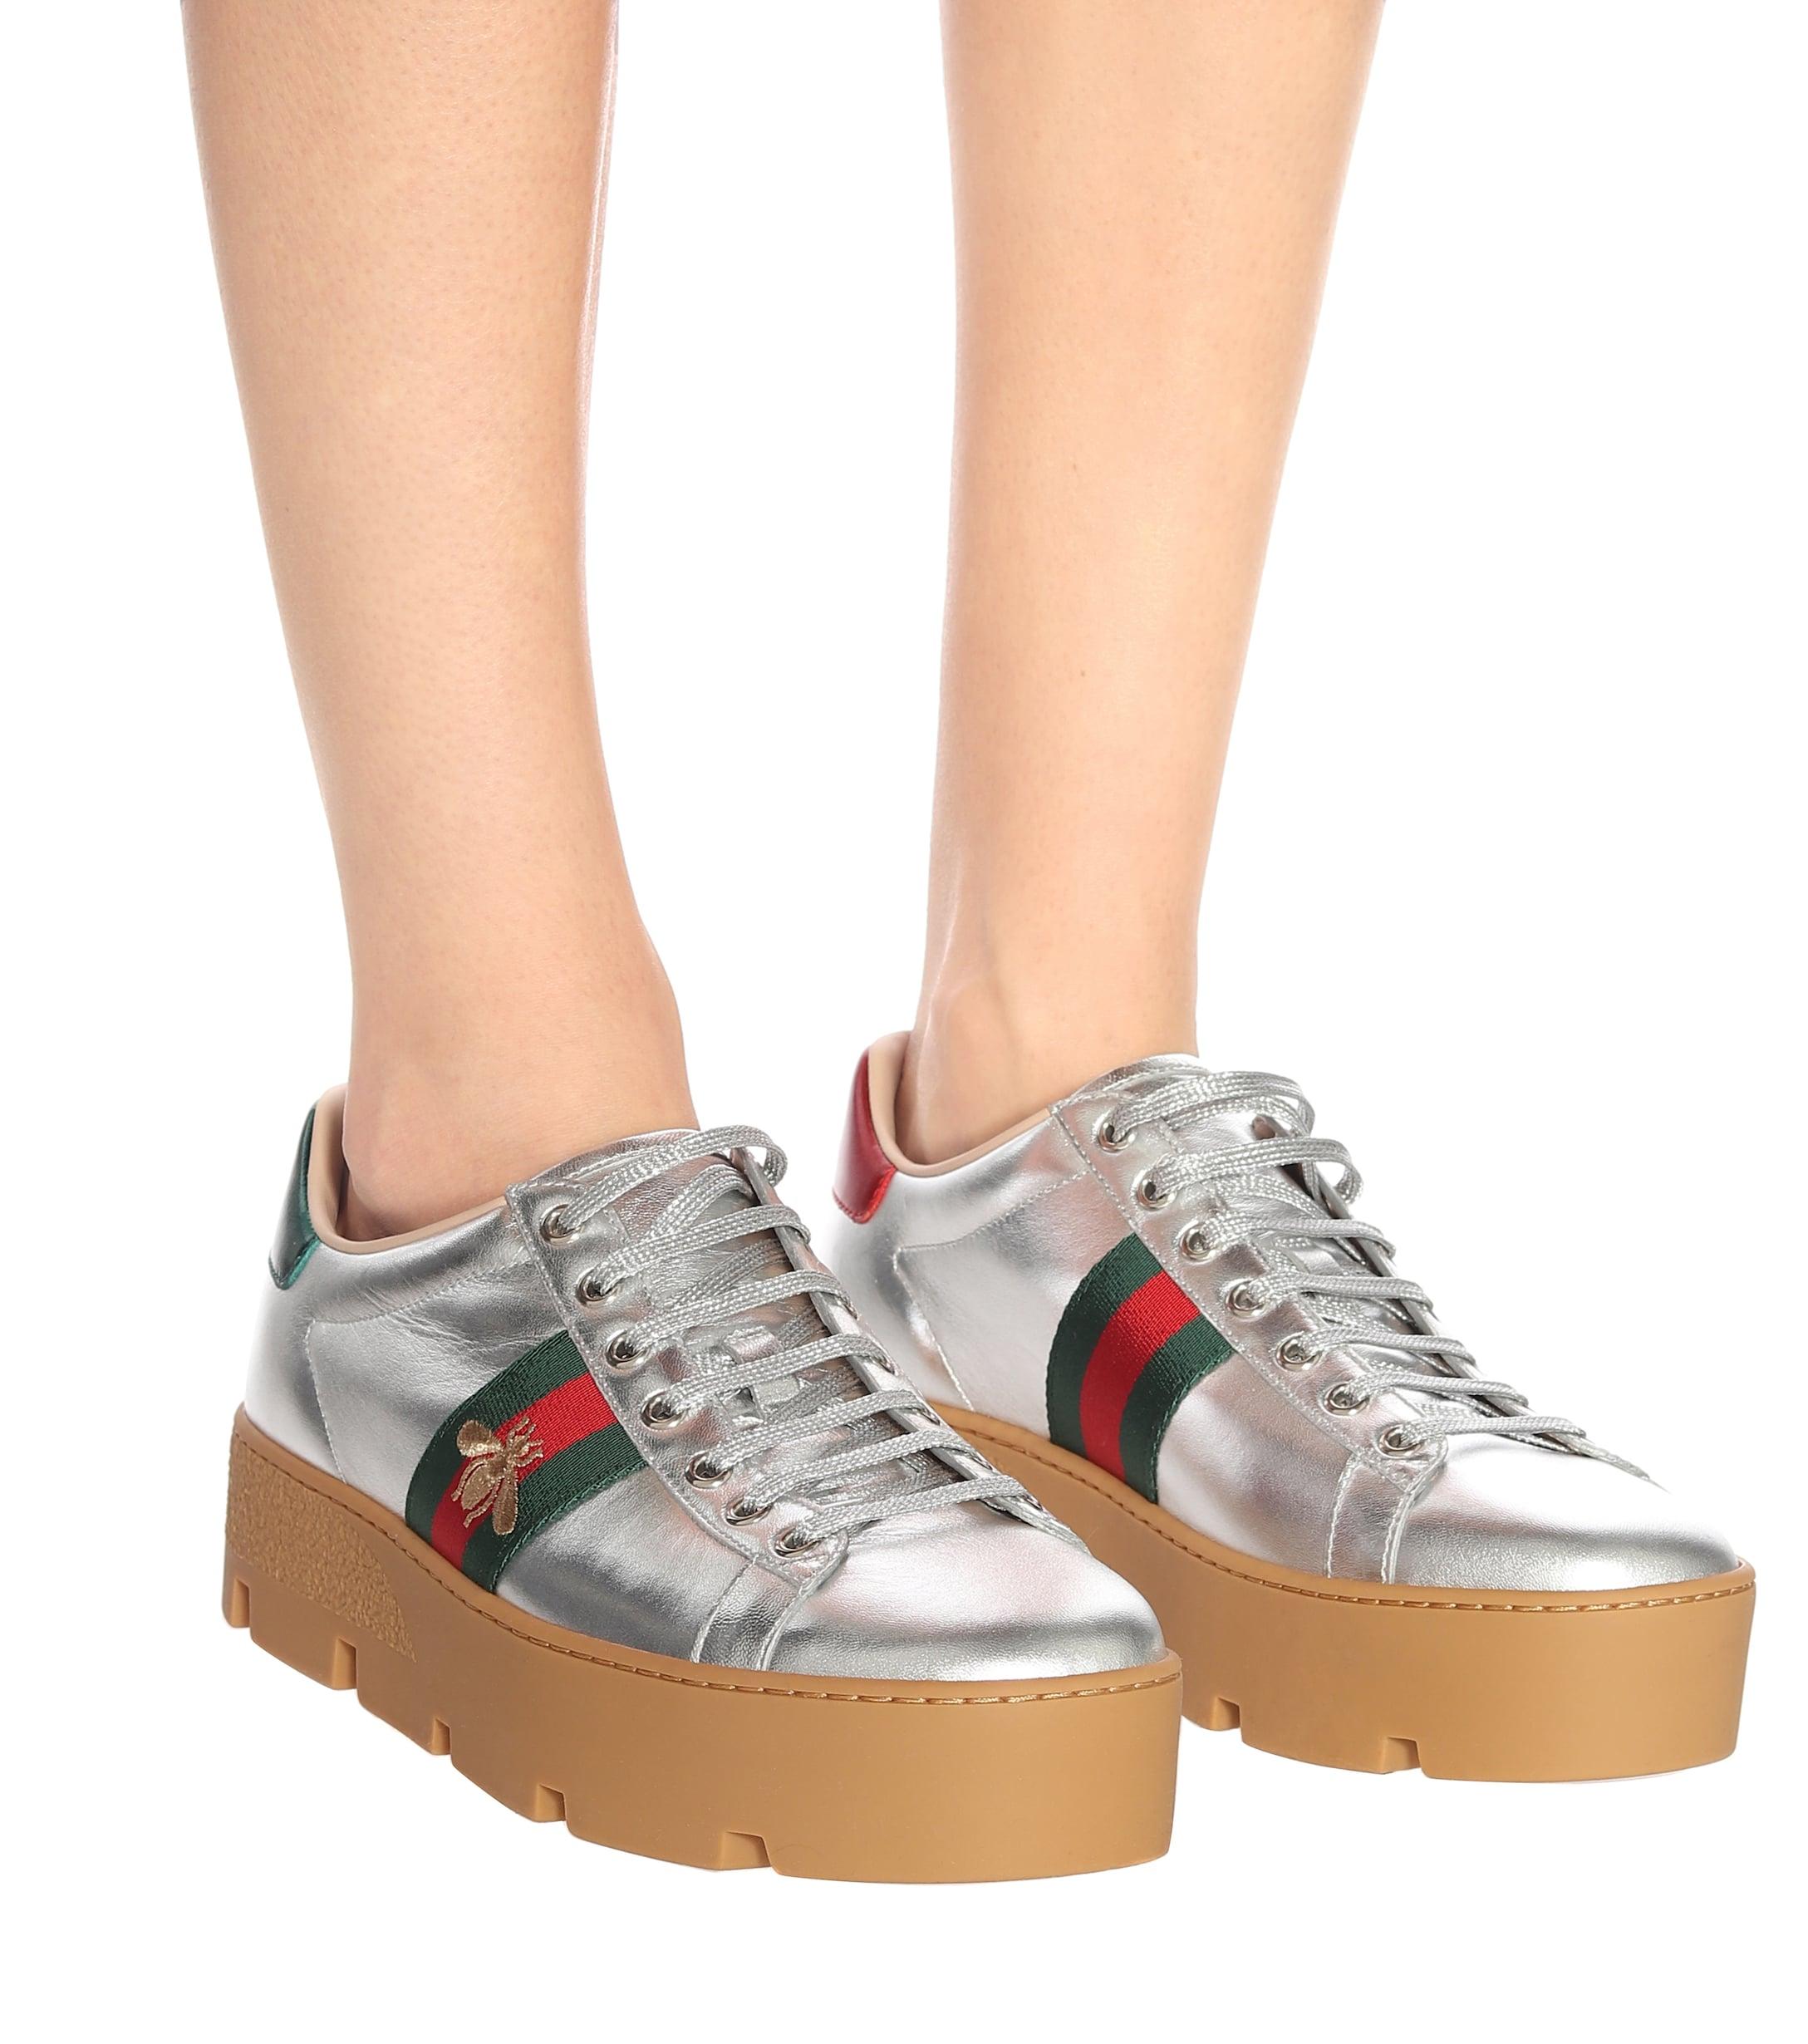 Gucci Ace Leather Platform Sneakers in Silver (Metallic) - Lyst